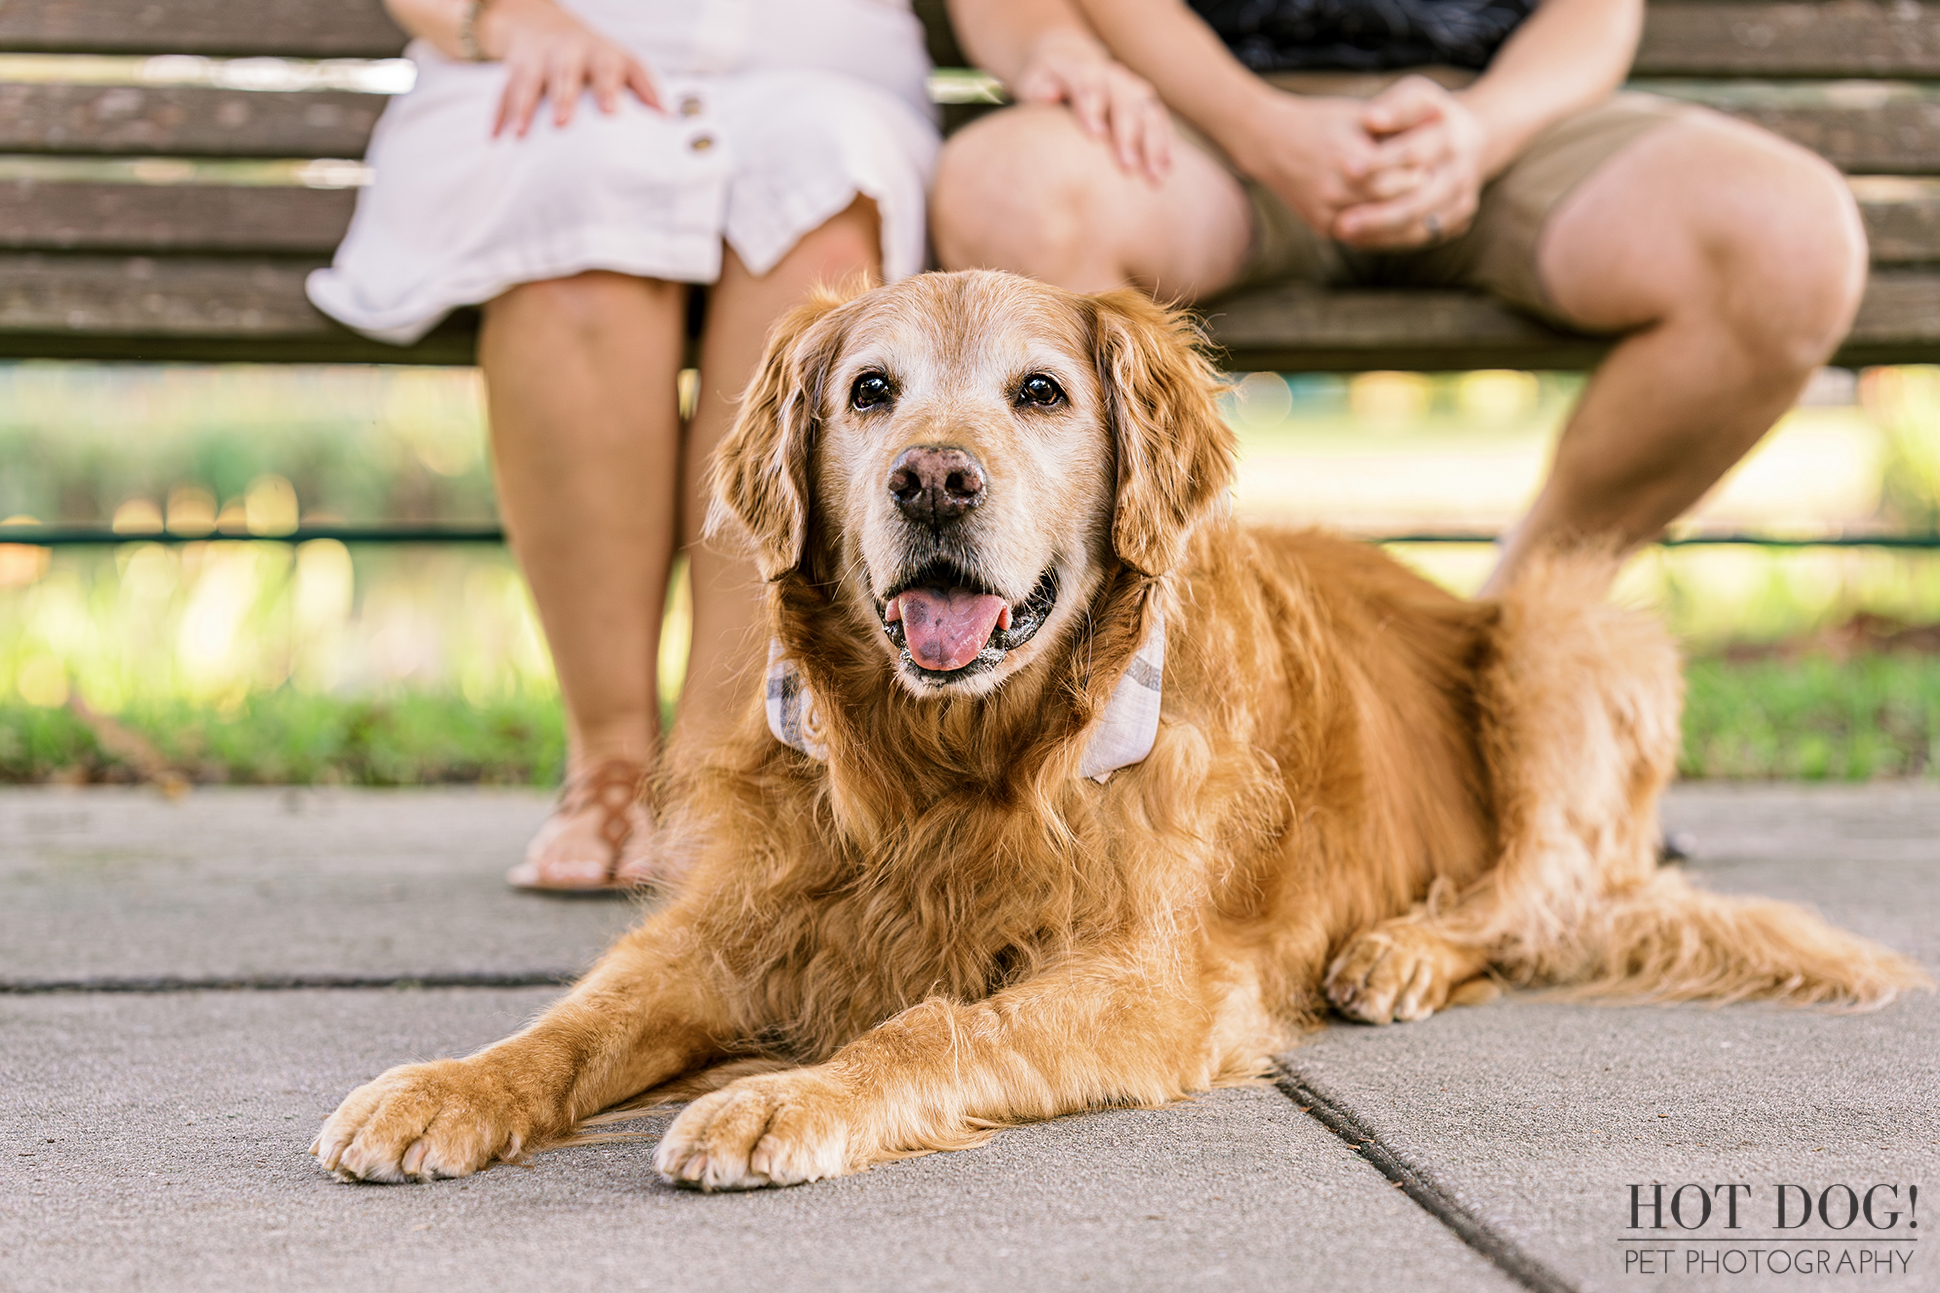 Celebration of Paws and Patio: Osho, the senior golden retriever, relaxes on a sidewalk in Celebration, Florida, soaking up the sun and enjoying the sights and sounds with his human companions. (Photo by Hot Dog! Pet Photography)